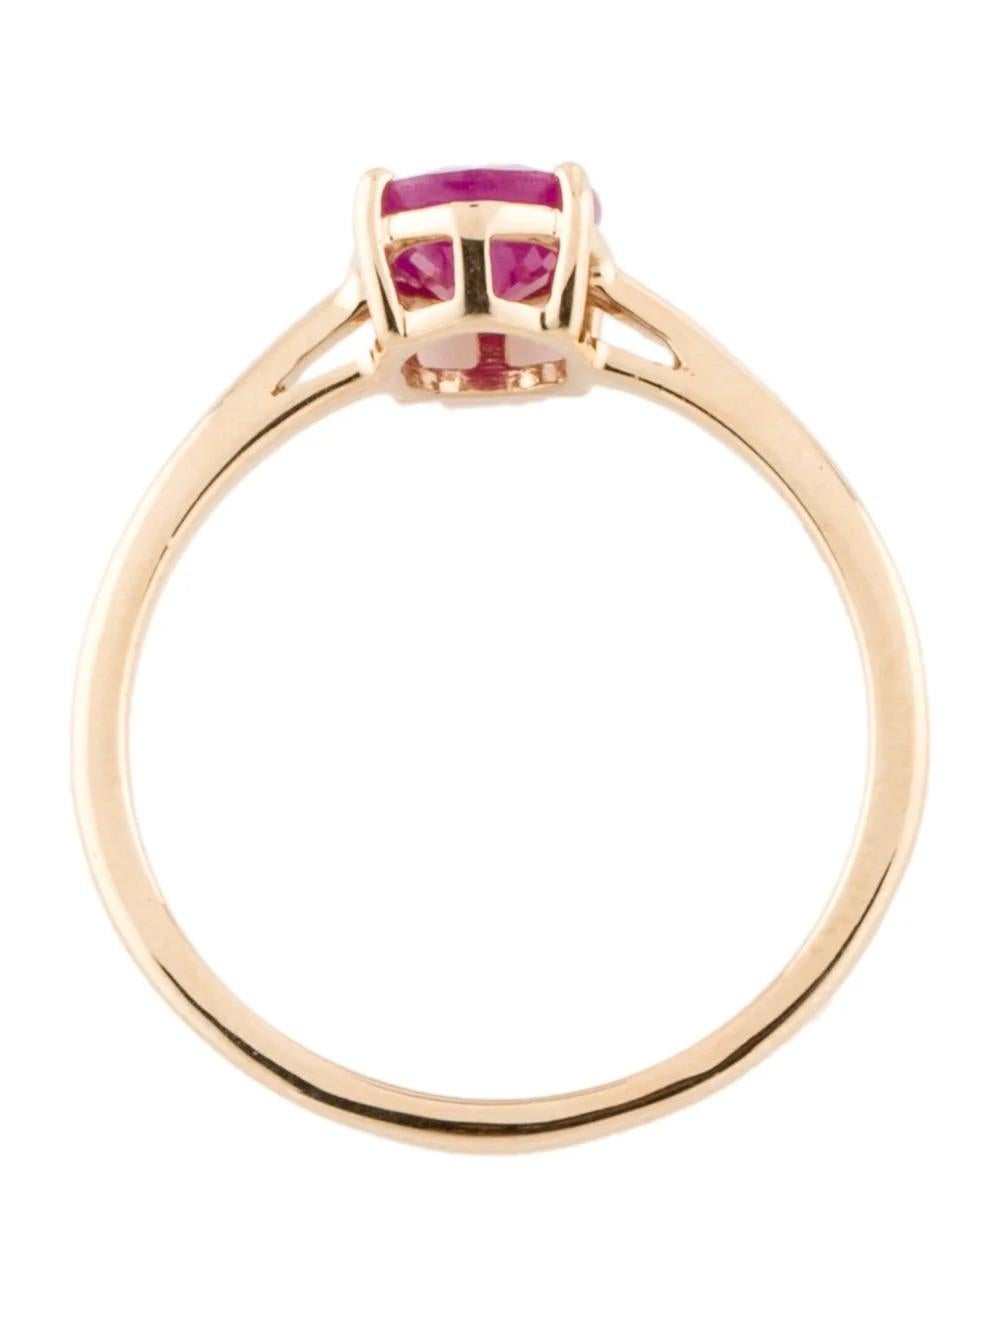 Women's 14K Ruby Cocktail Ring - 1.13ct, Size 7, Timeless Elegance, Vibrant Gemstone For Sale